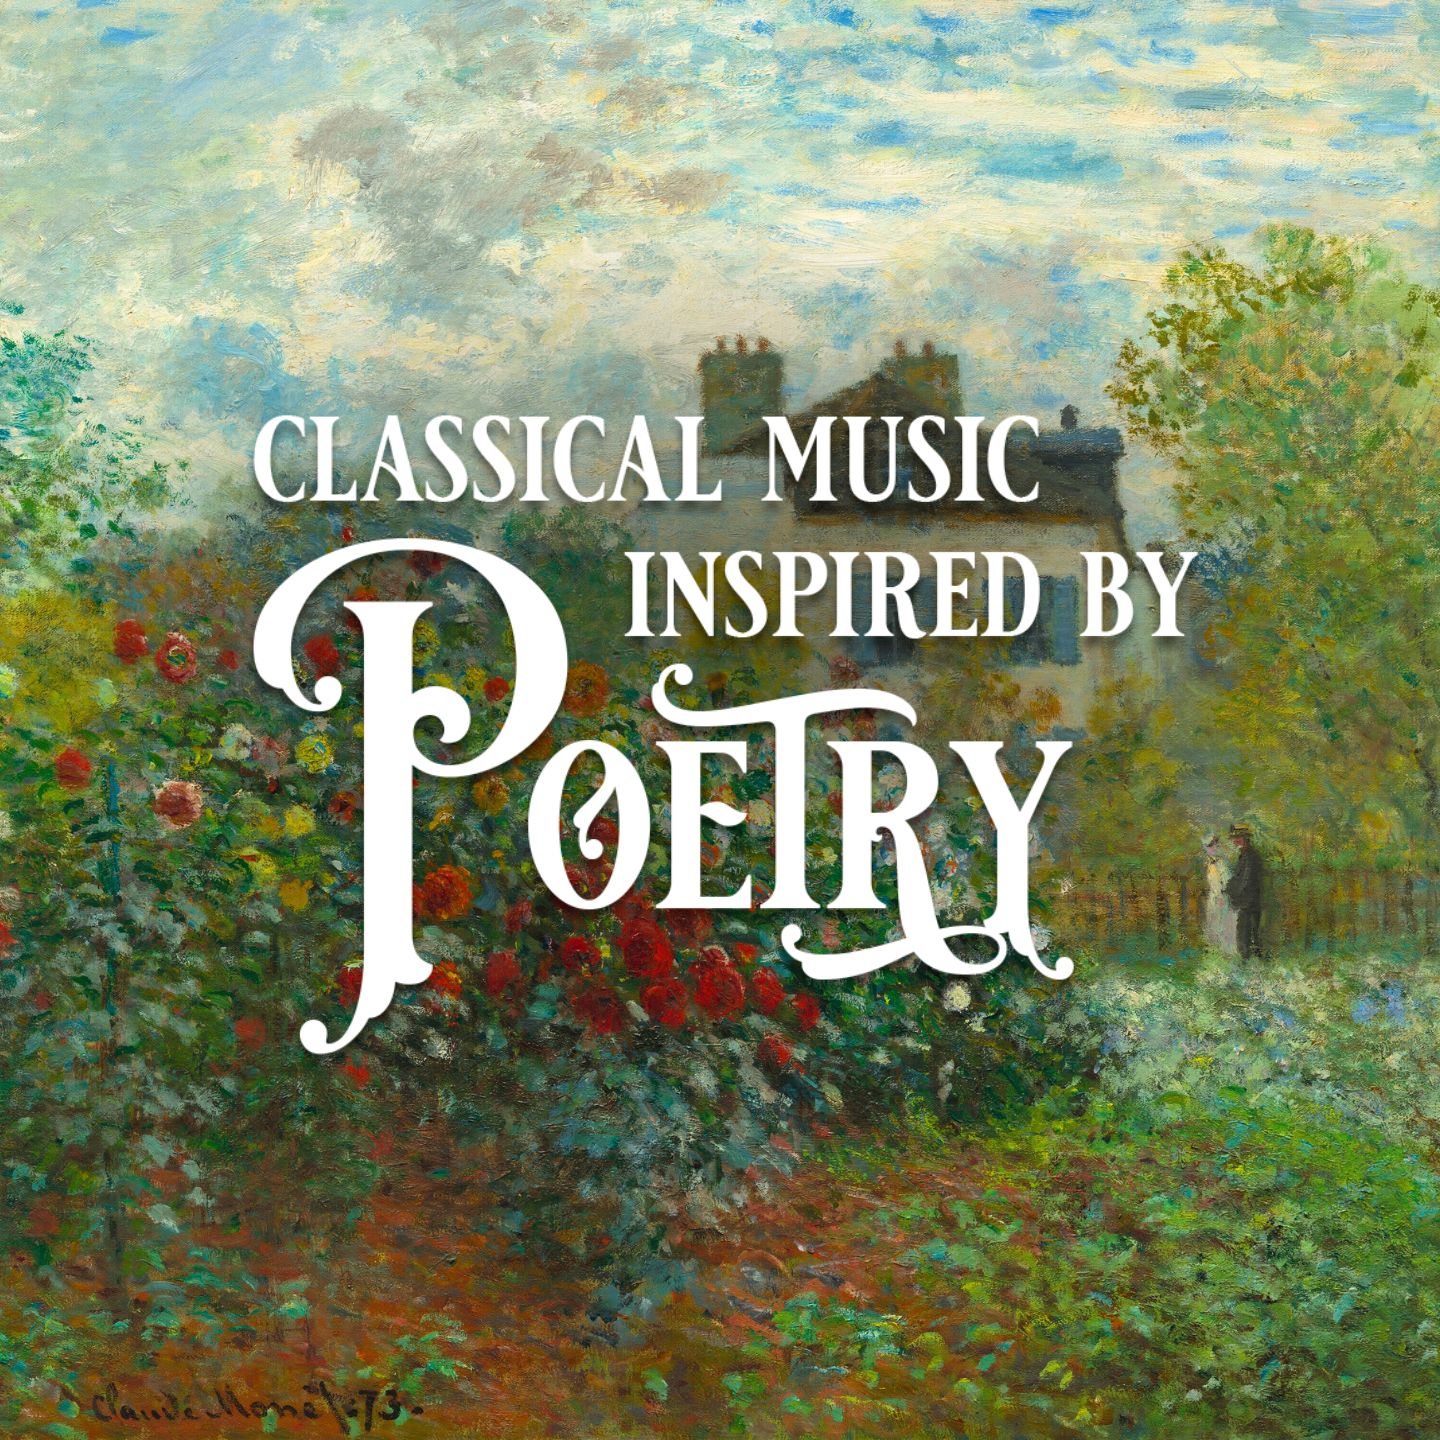 Classical Music Inspired by Poetry and Literature